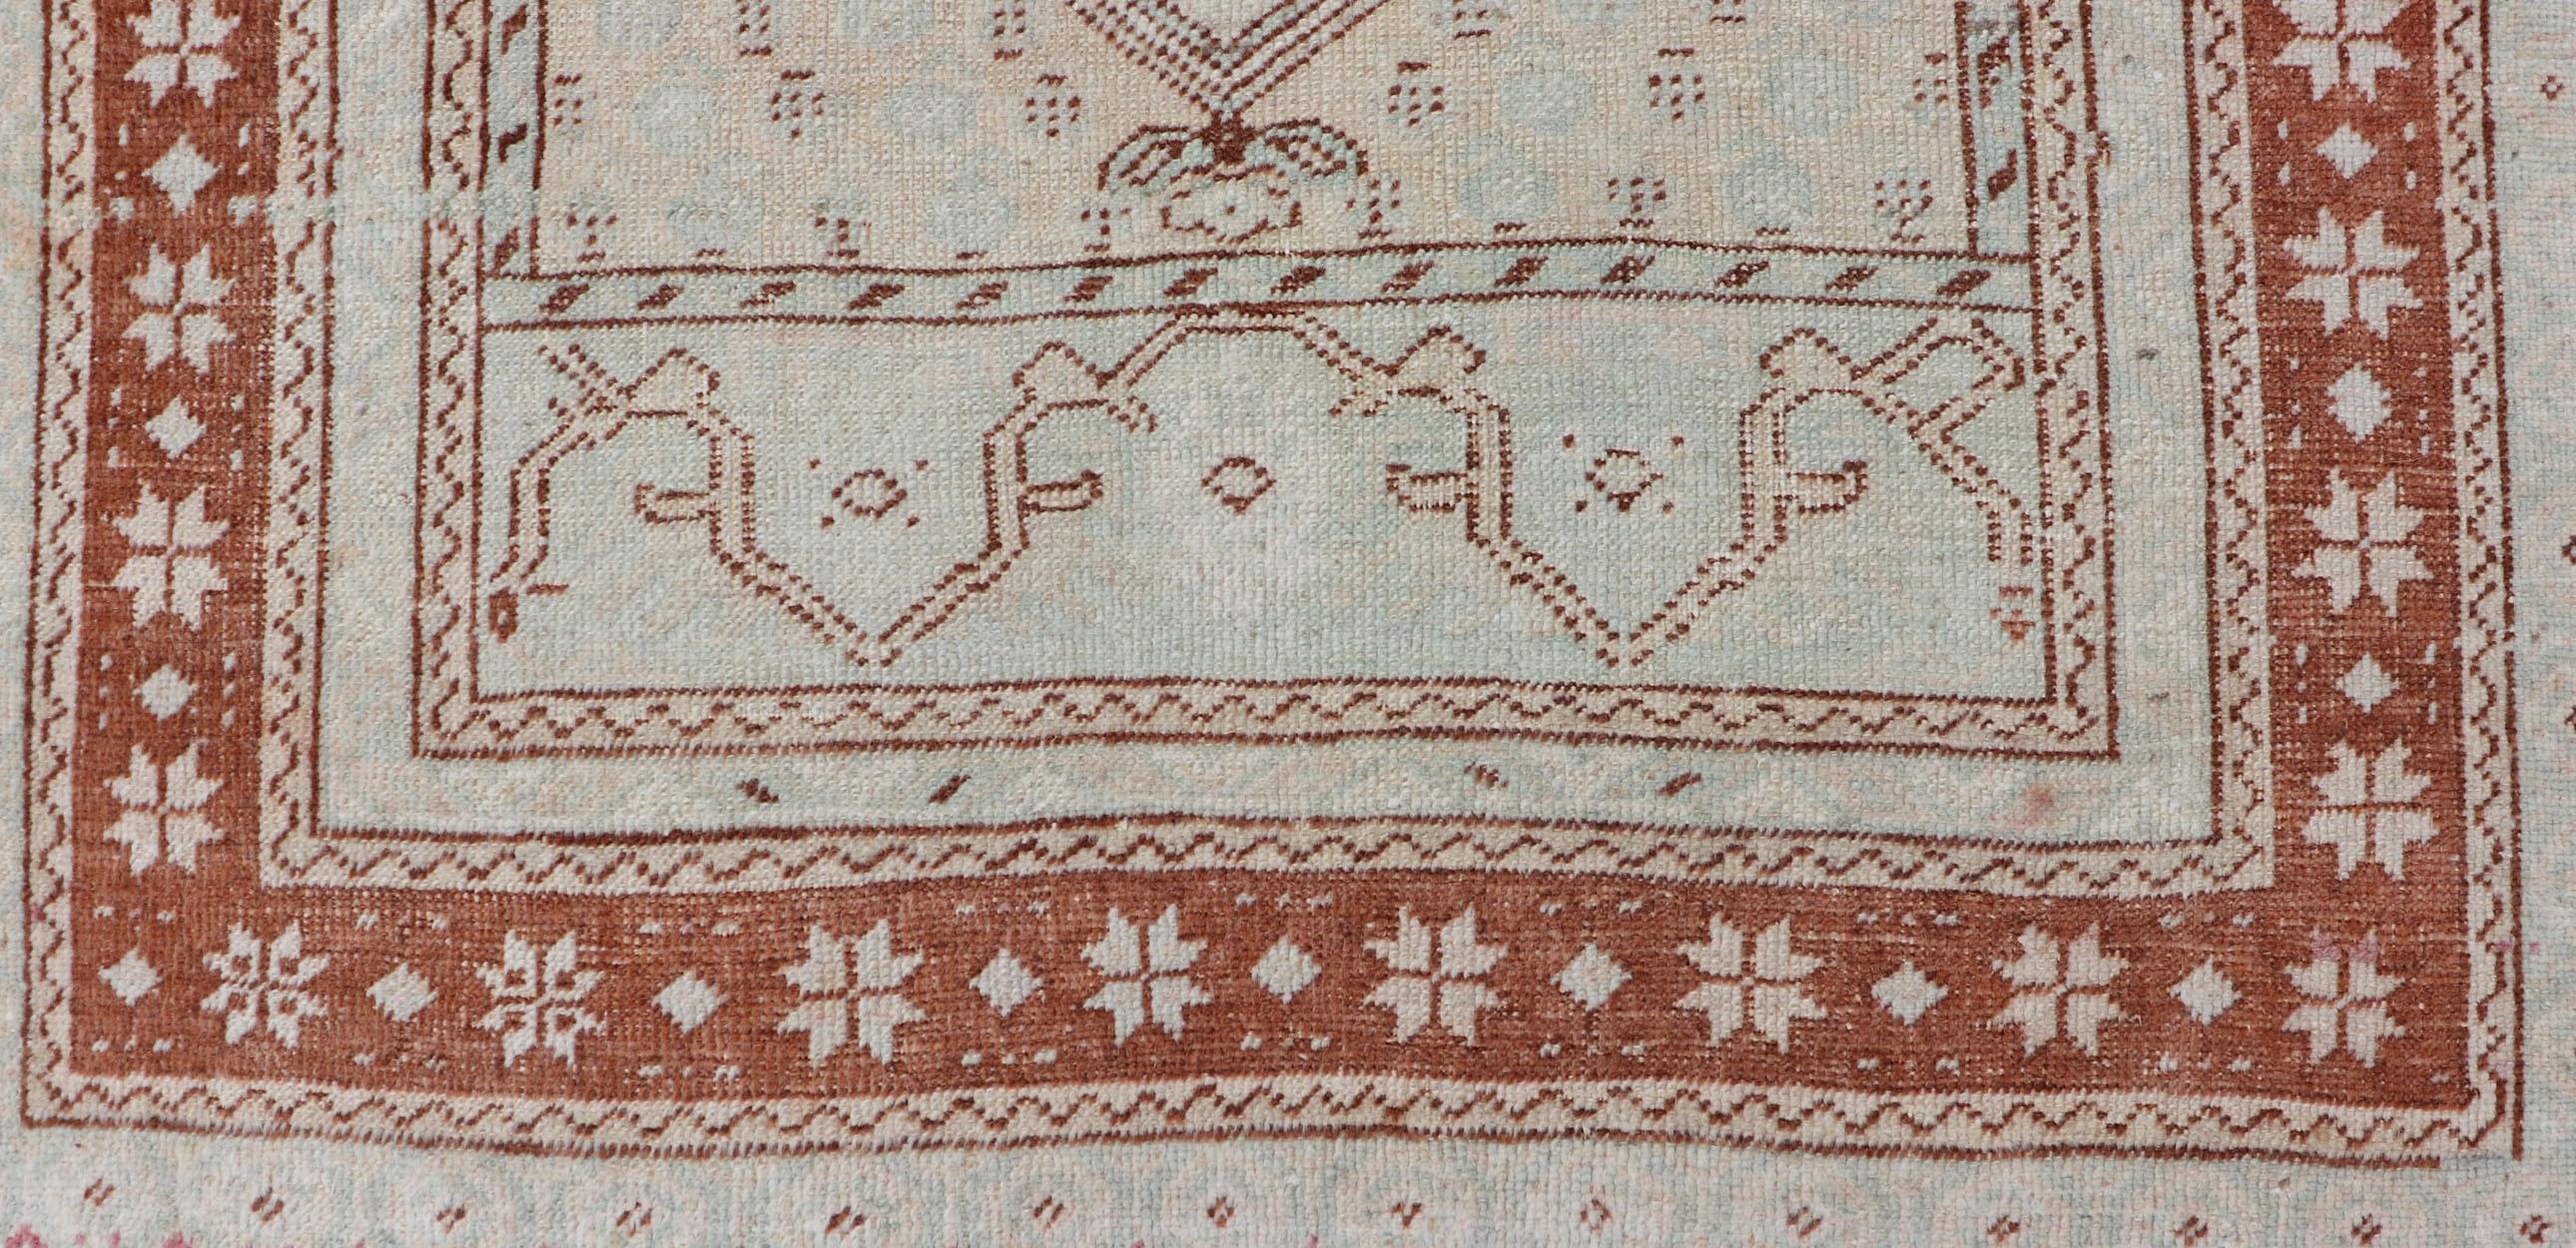 Medallion design Turkish vintage rug in neutral tones of tan, taupe, light blue, camel, and brown. Keivan Woven Arts / rug EN-178302, country of origin / type: Turkey / Oushak, circa 1940.
This muted vintage Turkish Oushak carpet rests beautifully